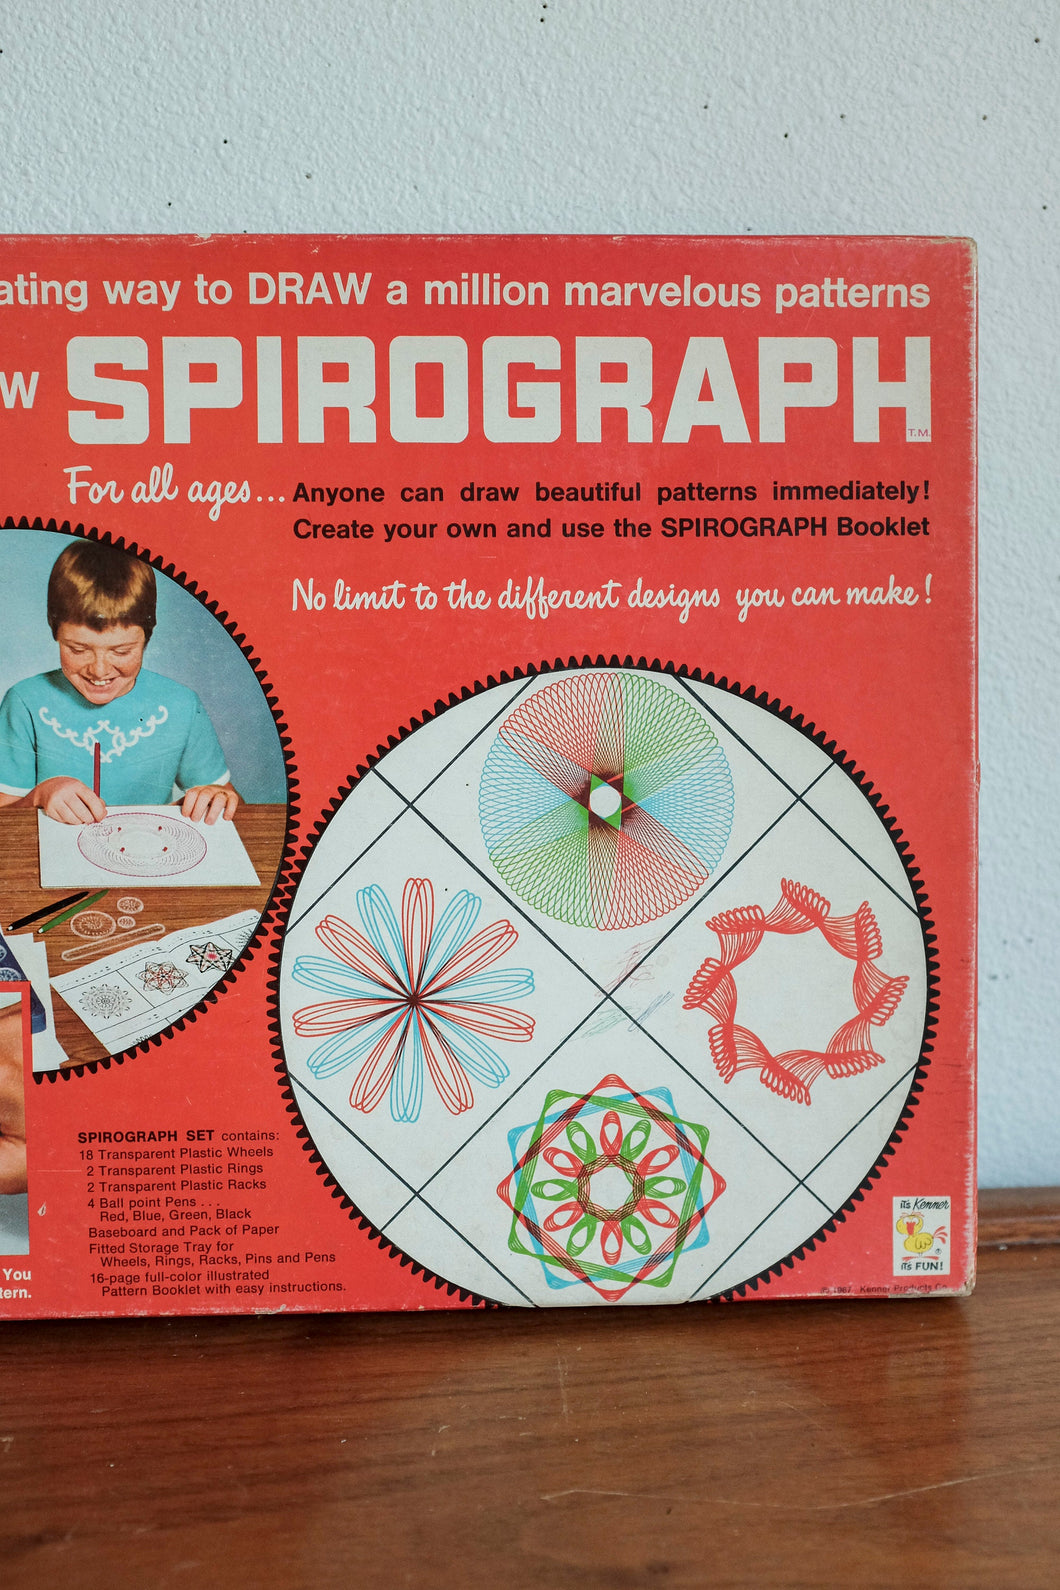 See how vintage Spirograph toys made it easy for anyone to draw